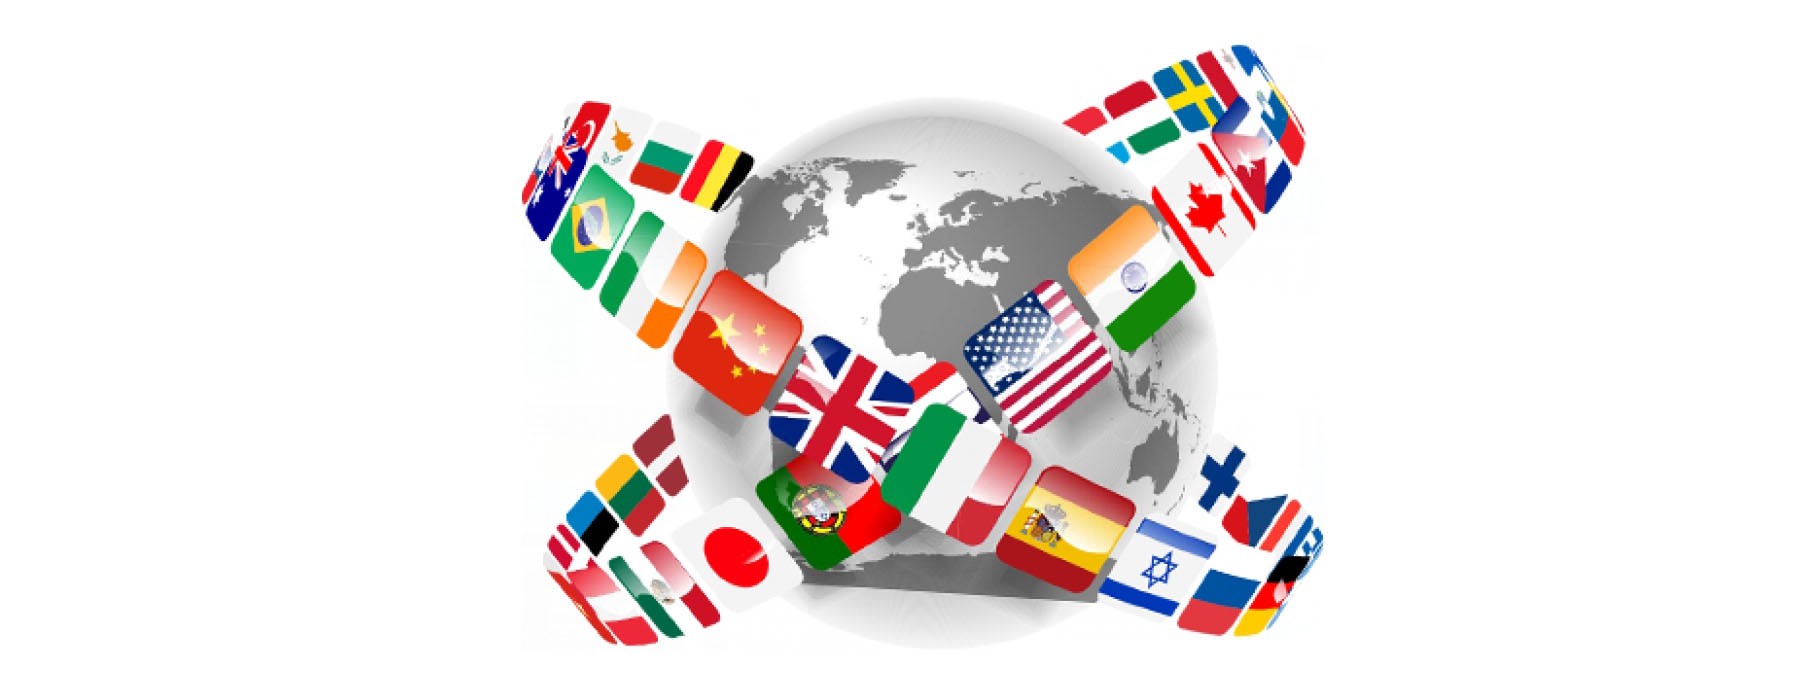 Localization and flexibility for global manufacturers